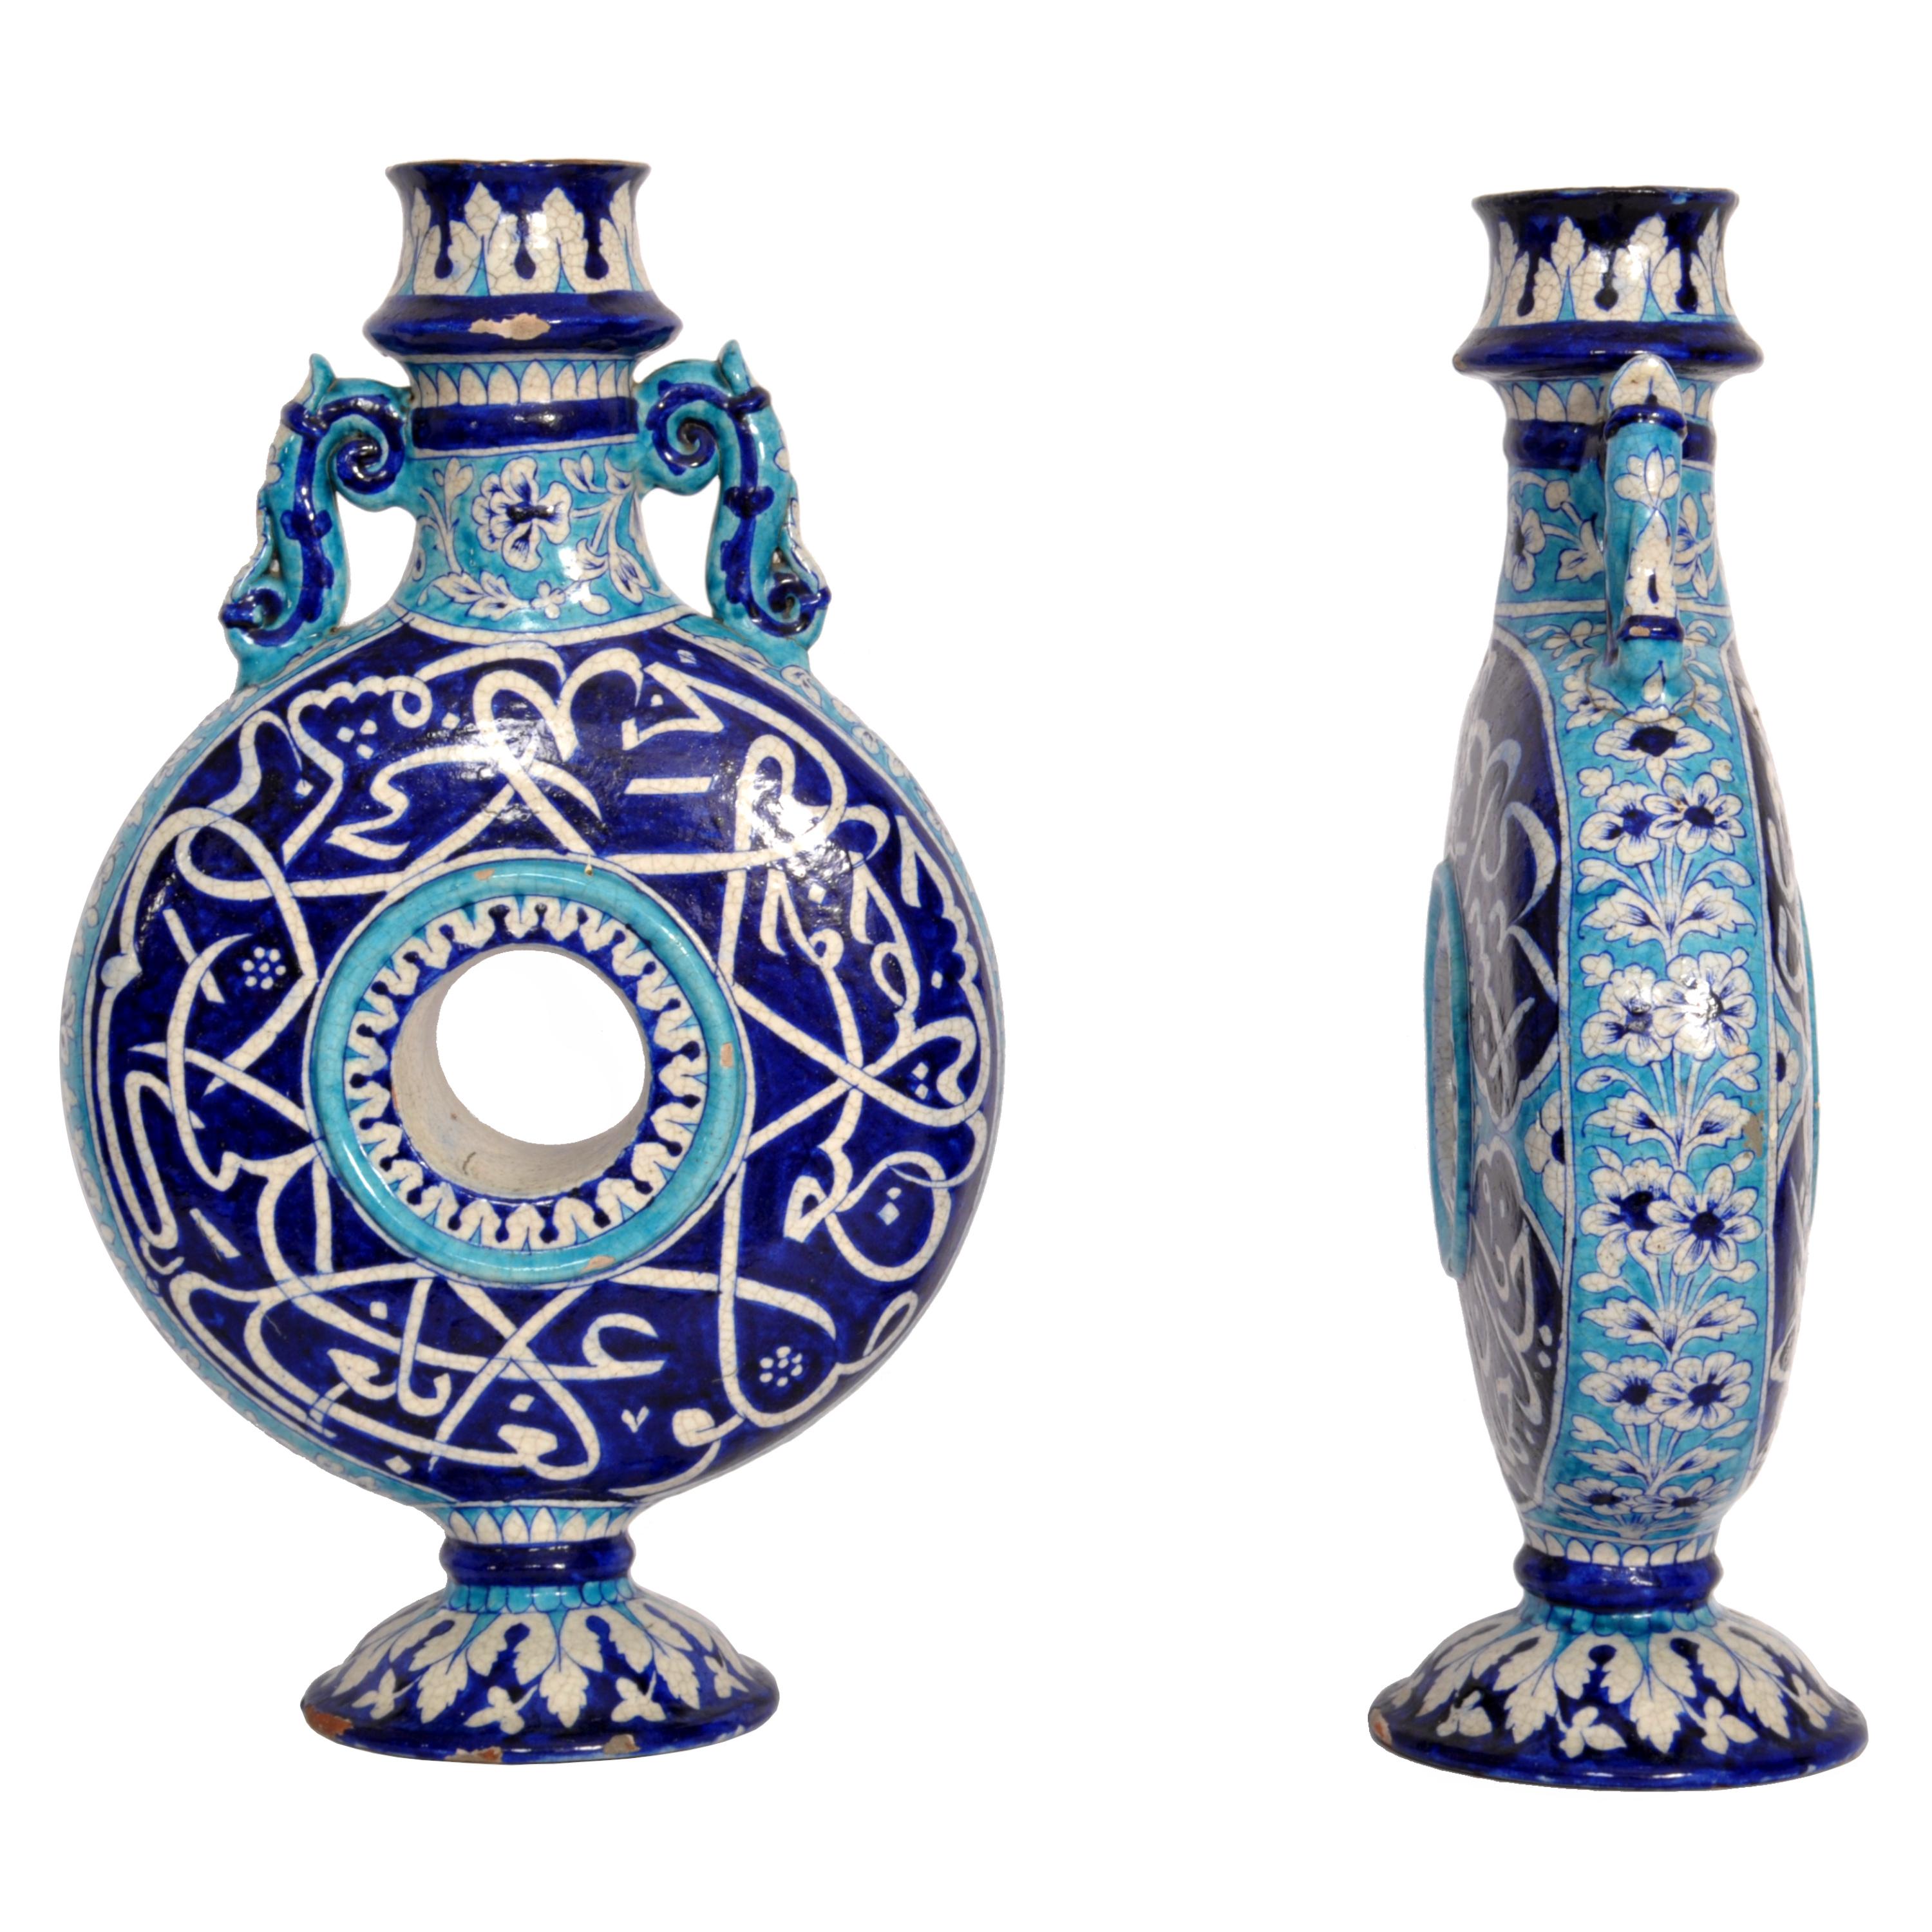 A rare pair of large 19th Century antique Islamic Multan pottery moon flasks, India, Sindh province (now Western Pakistan), circa 1850.
The flasks are decorated in blue, white and turquoise glazes, the top decorated with lappets above an elegant